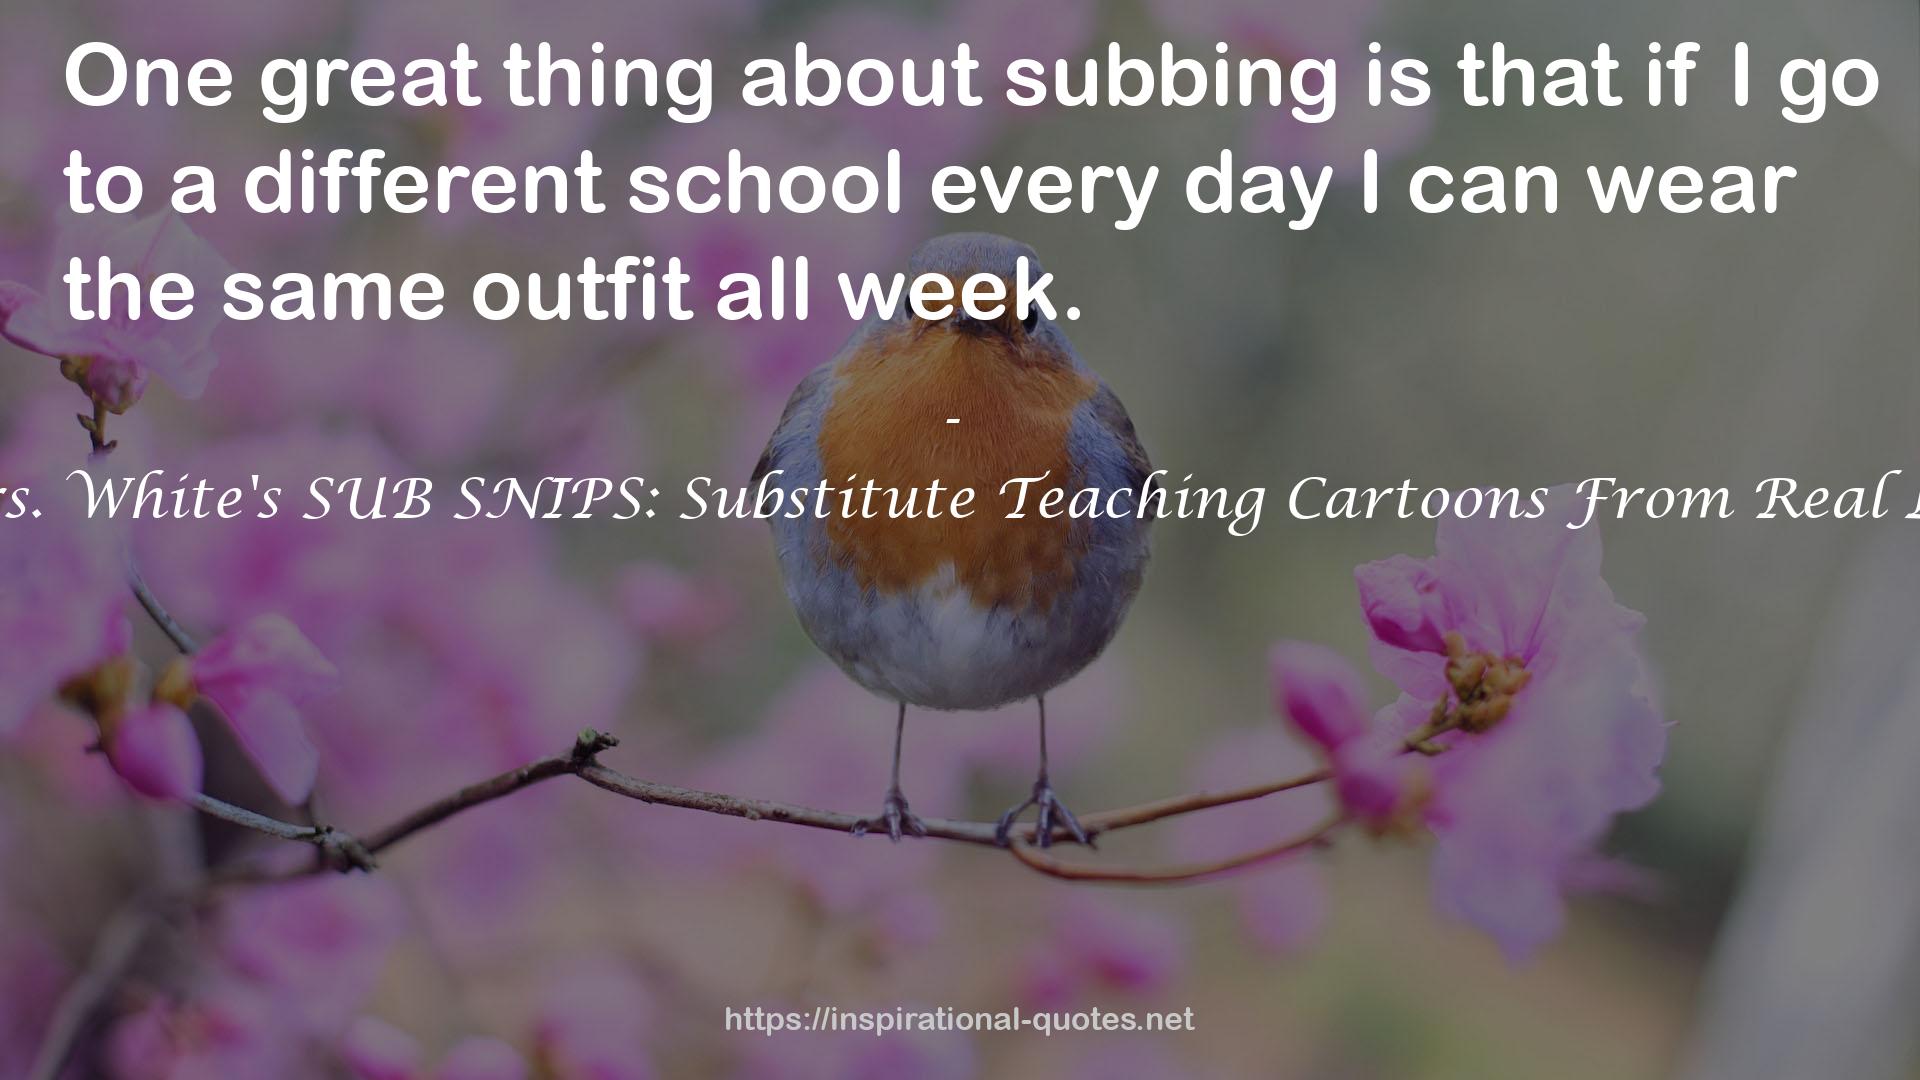 Mrs. White's SUB SNIPS: Substitute Teaching Cartoons From Real Life QUOTES